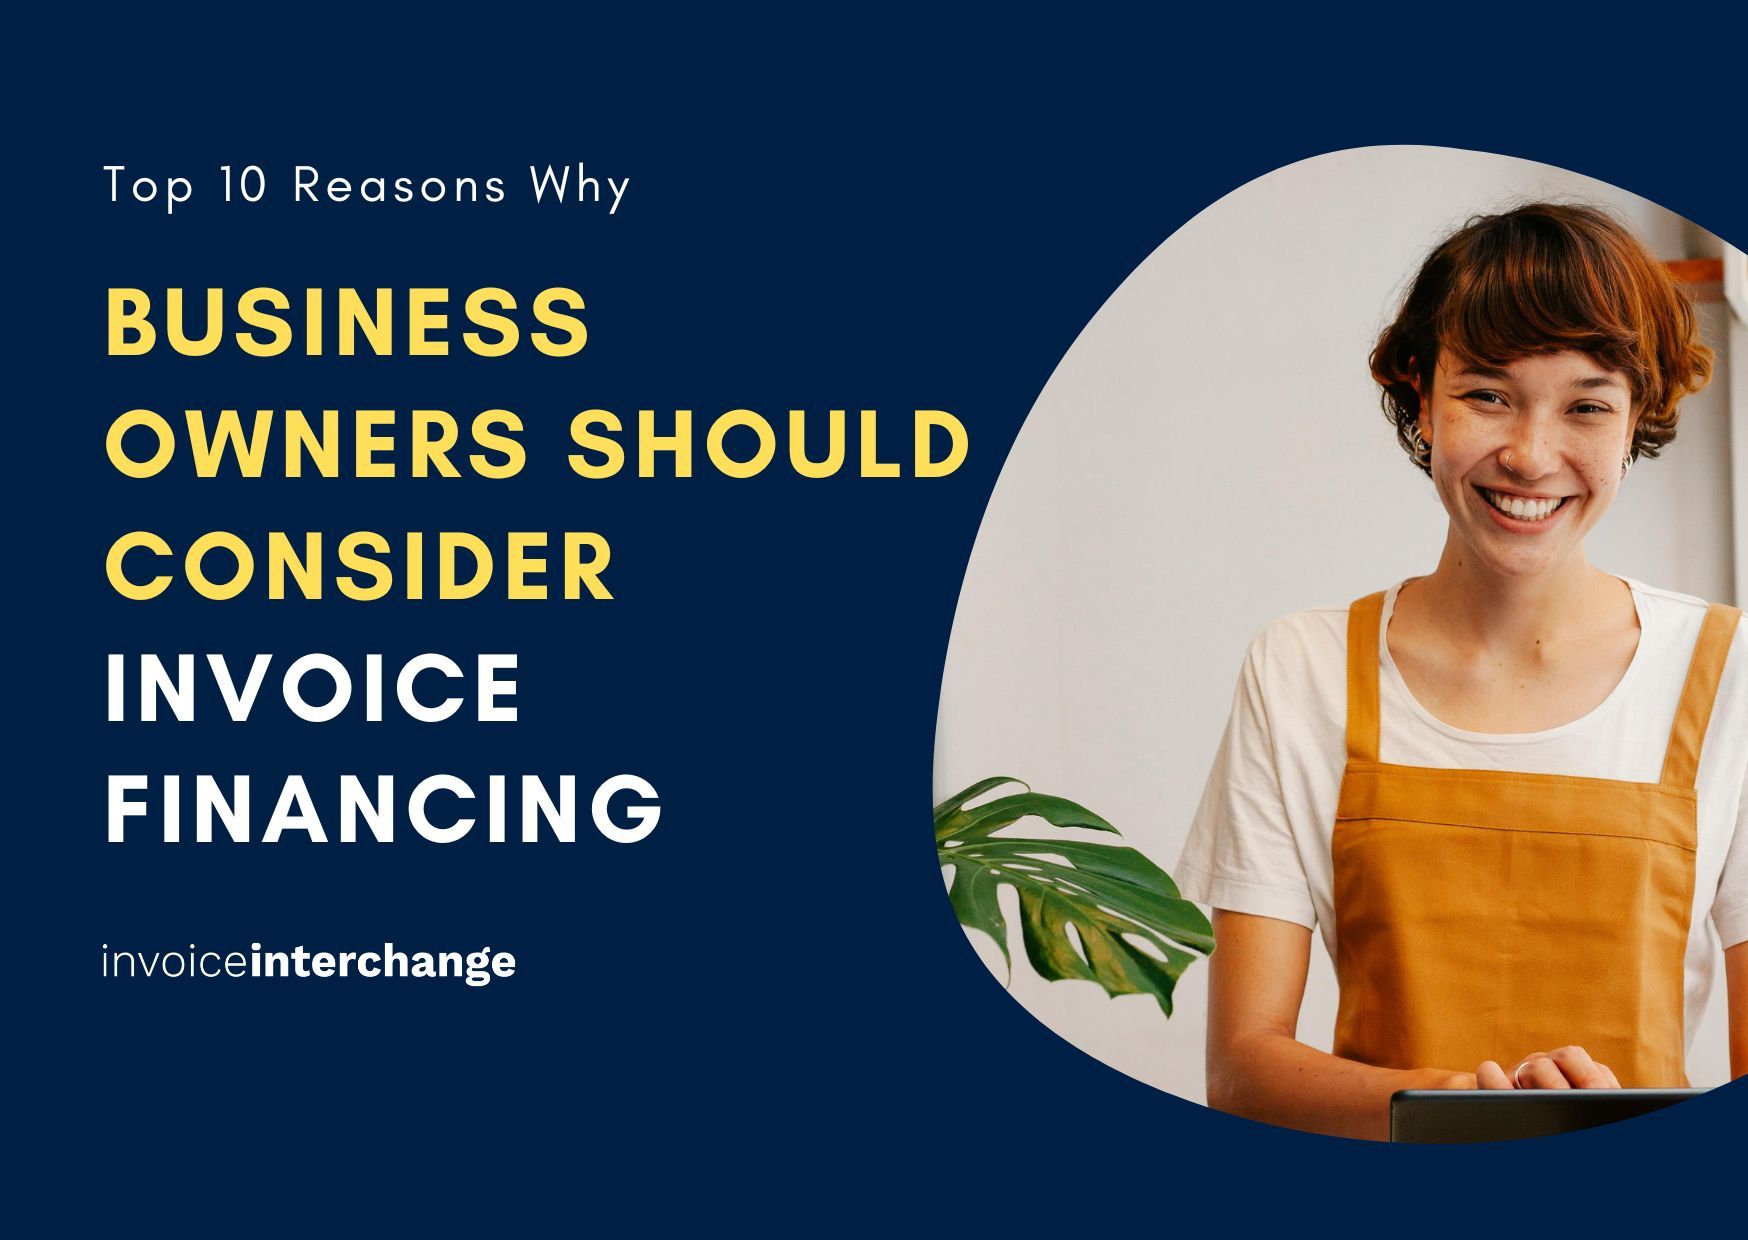 Top 10 Reasons Why Business Owners Should Consider Invoice Financing